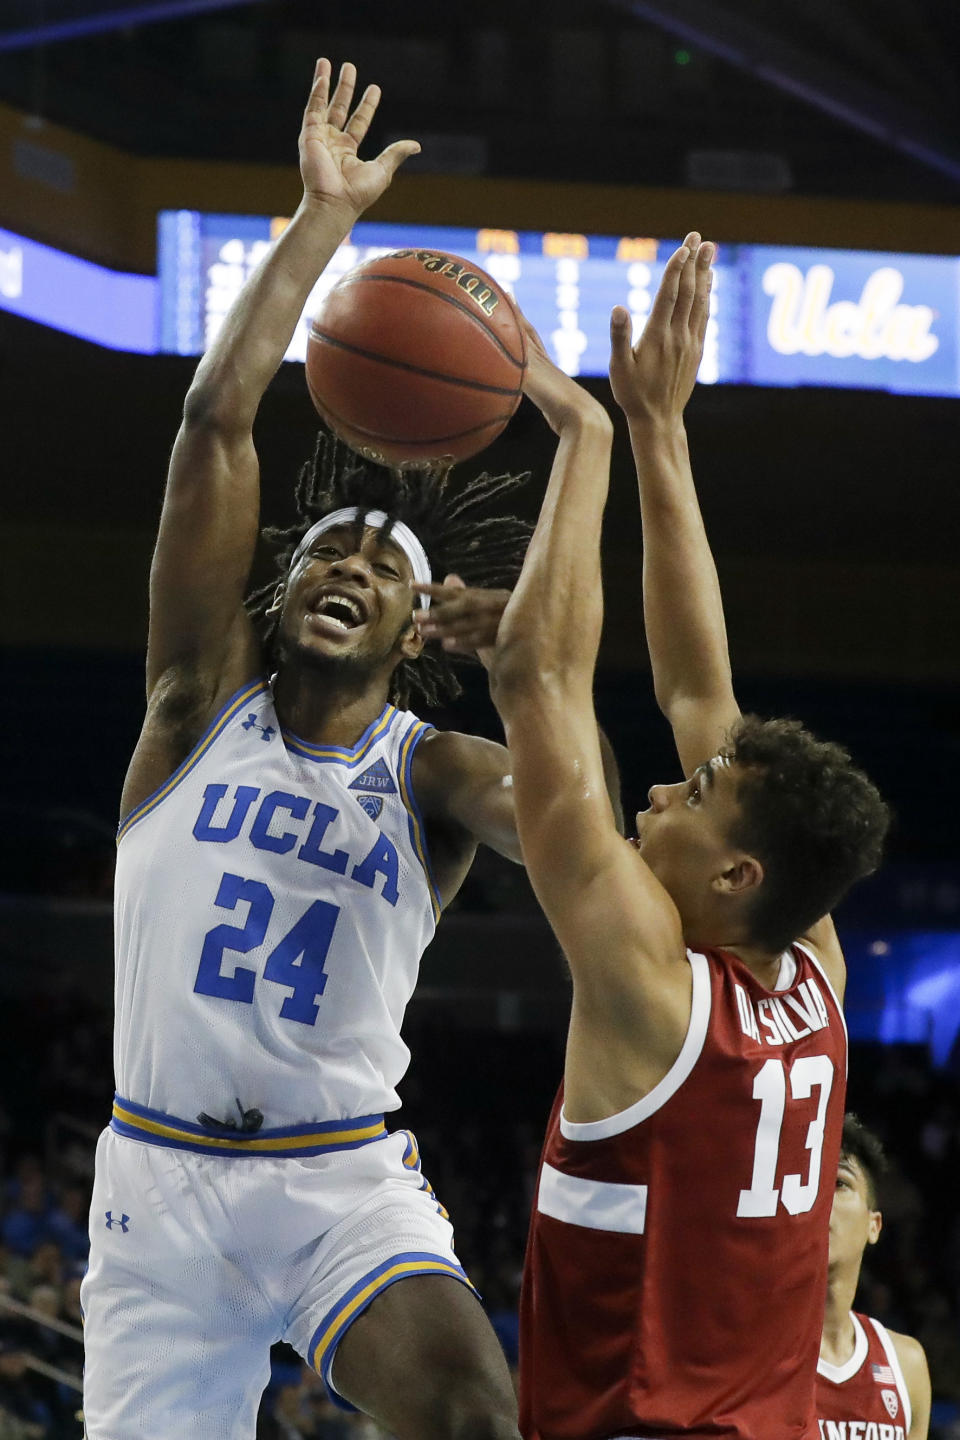 Stanford forward Oscar da Silva, right, blocks a shot by UCLA forward Jalen Hill during the second half of an NCAA college basketball game in Los Angeles, Wednesday, Jan. 15, 2020. (AP Photo/Chris Carlson)